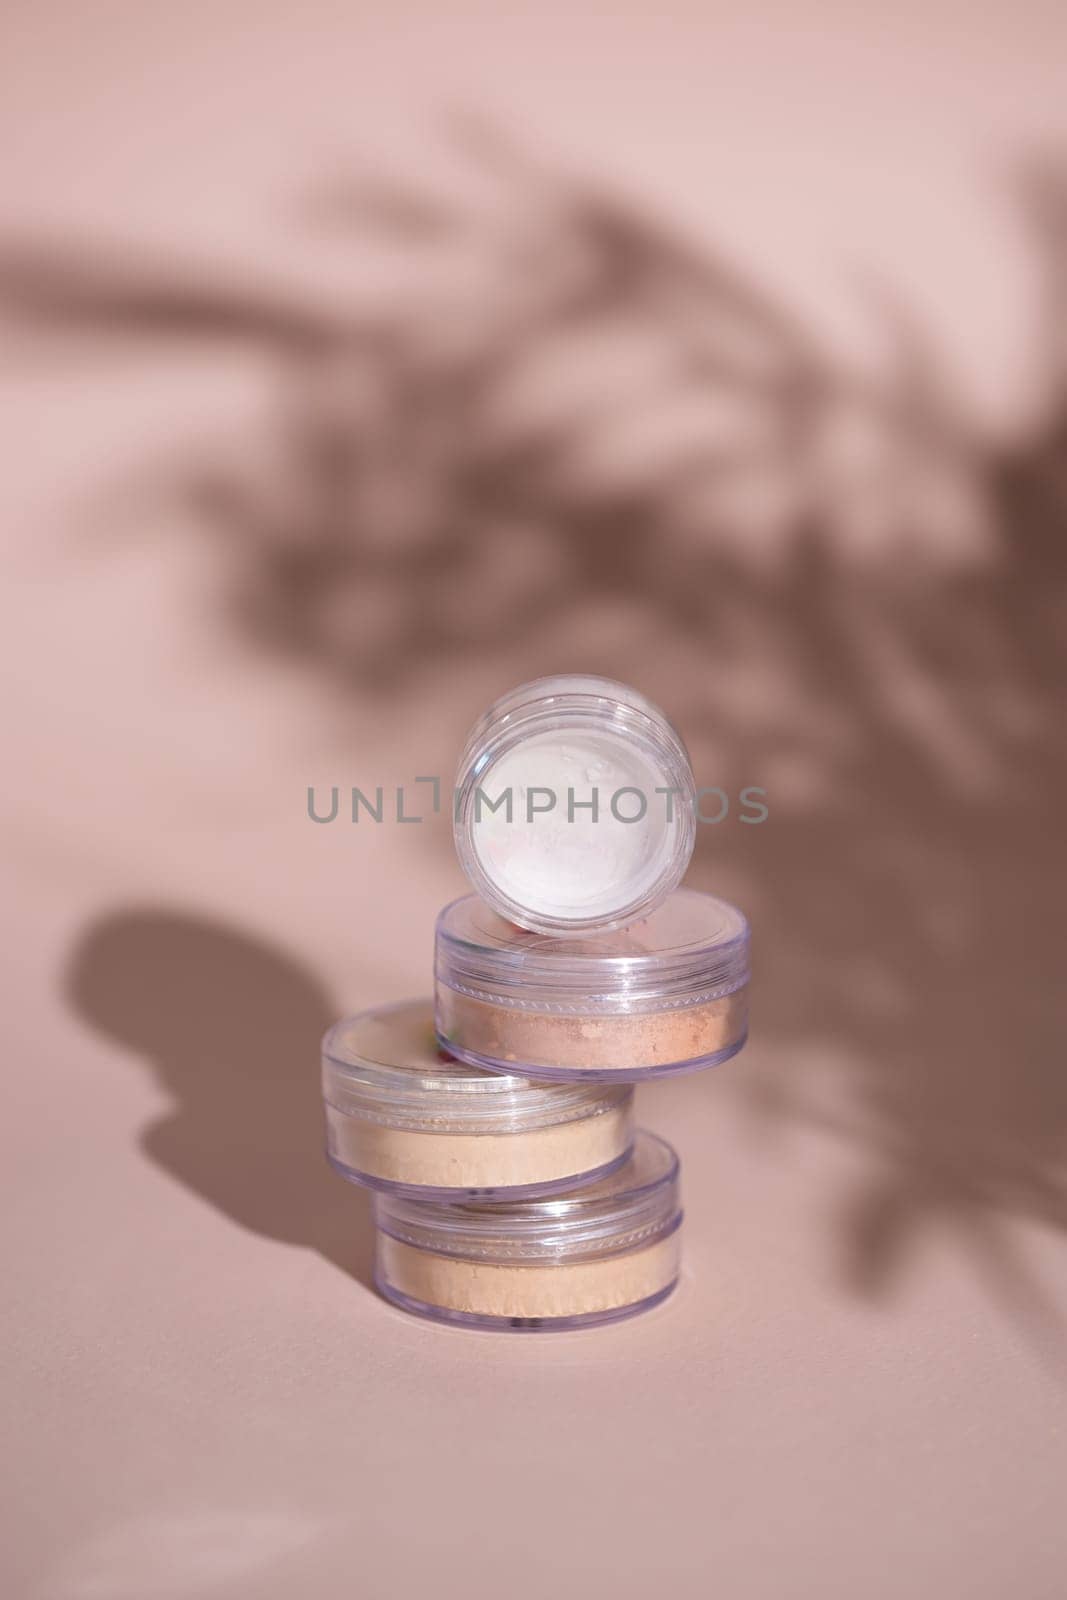 Mineral powder for skin tone color in small containers on pale rose colour background with shadows - beauty product and make up concept by Satura86